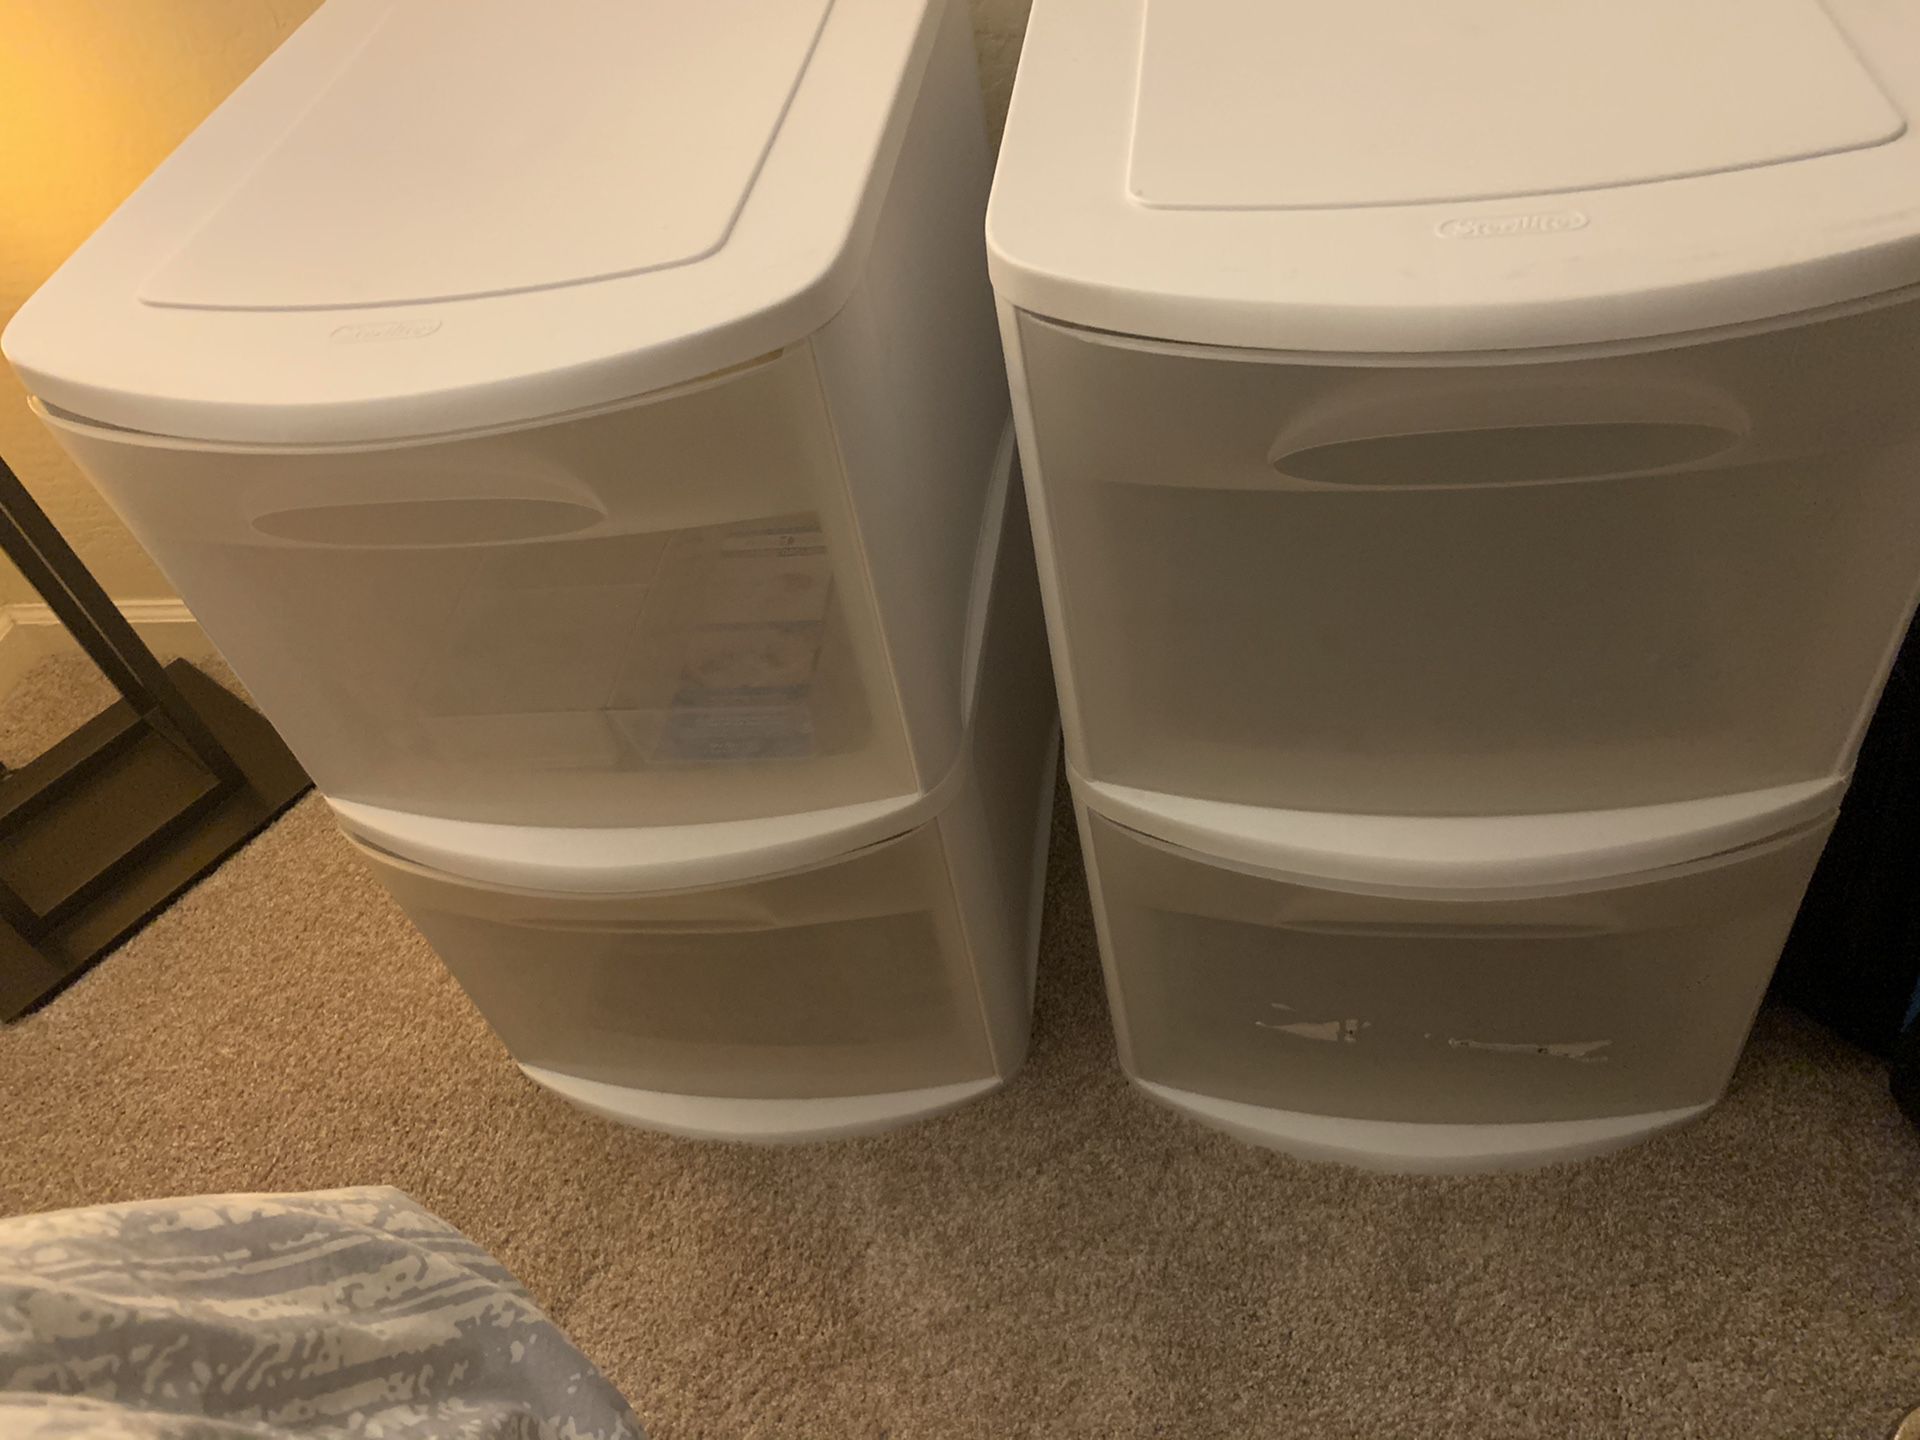 Large Sterilite 2 Drawer Bin, distance learning, storage, files, clothing, remote learning, education, closet, organization $12 each, 2 for 20